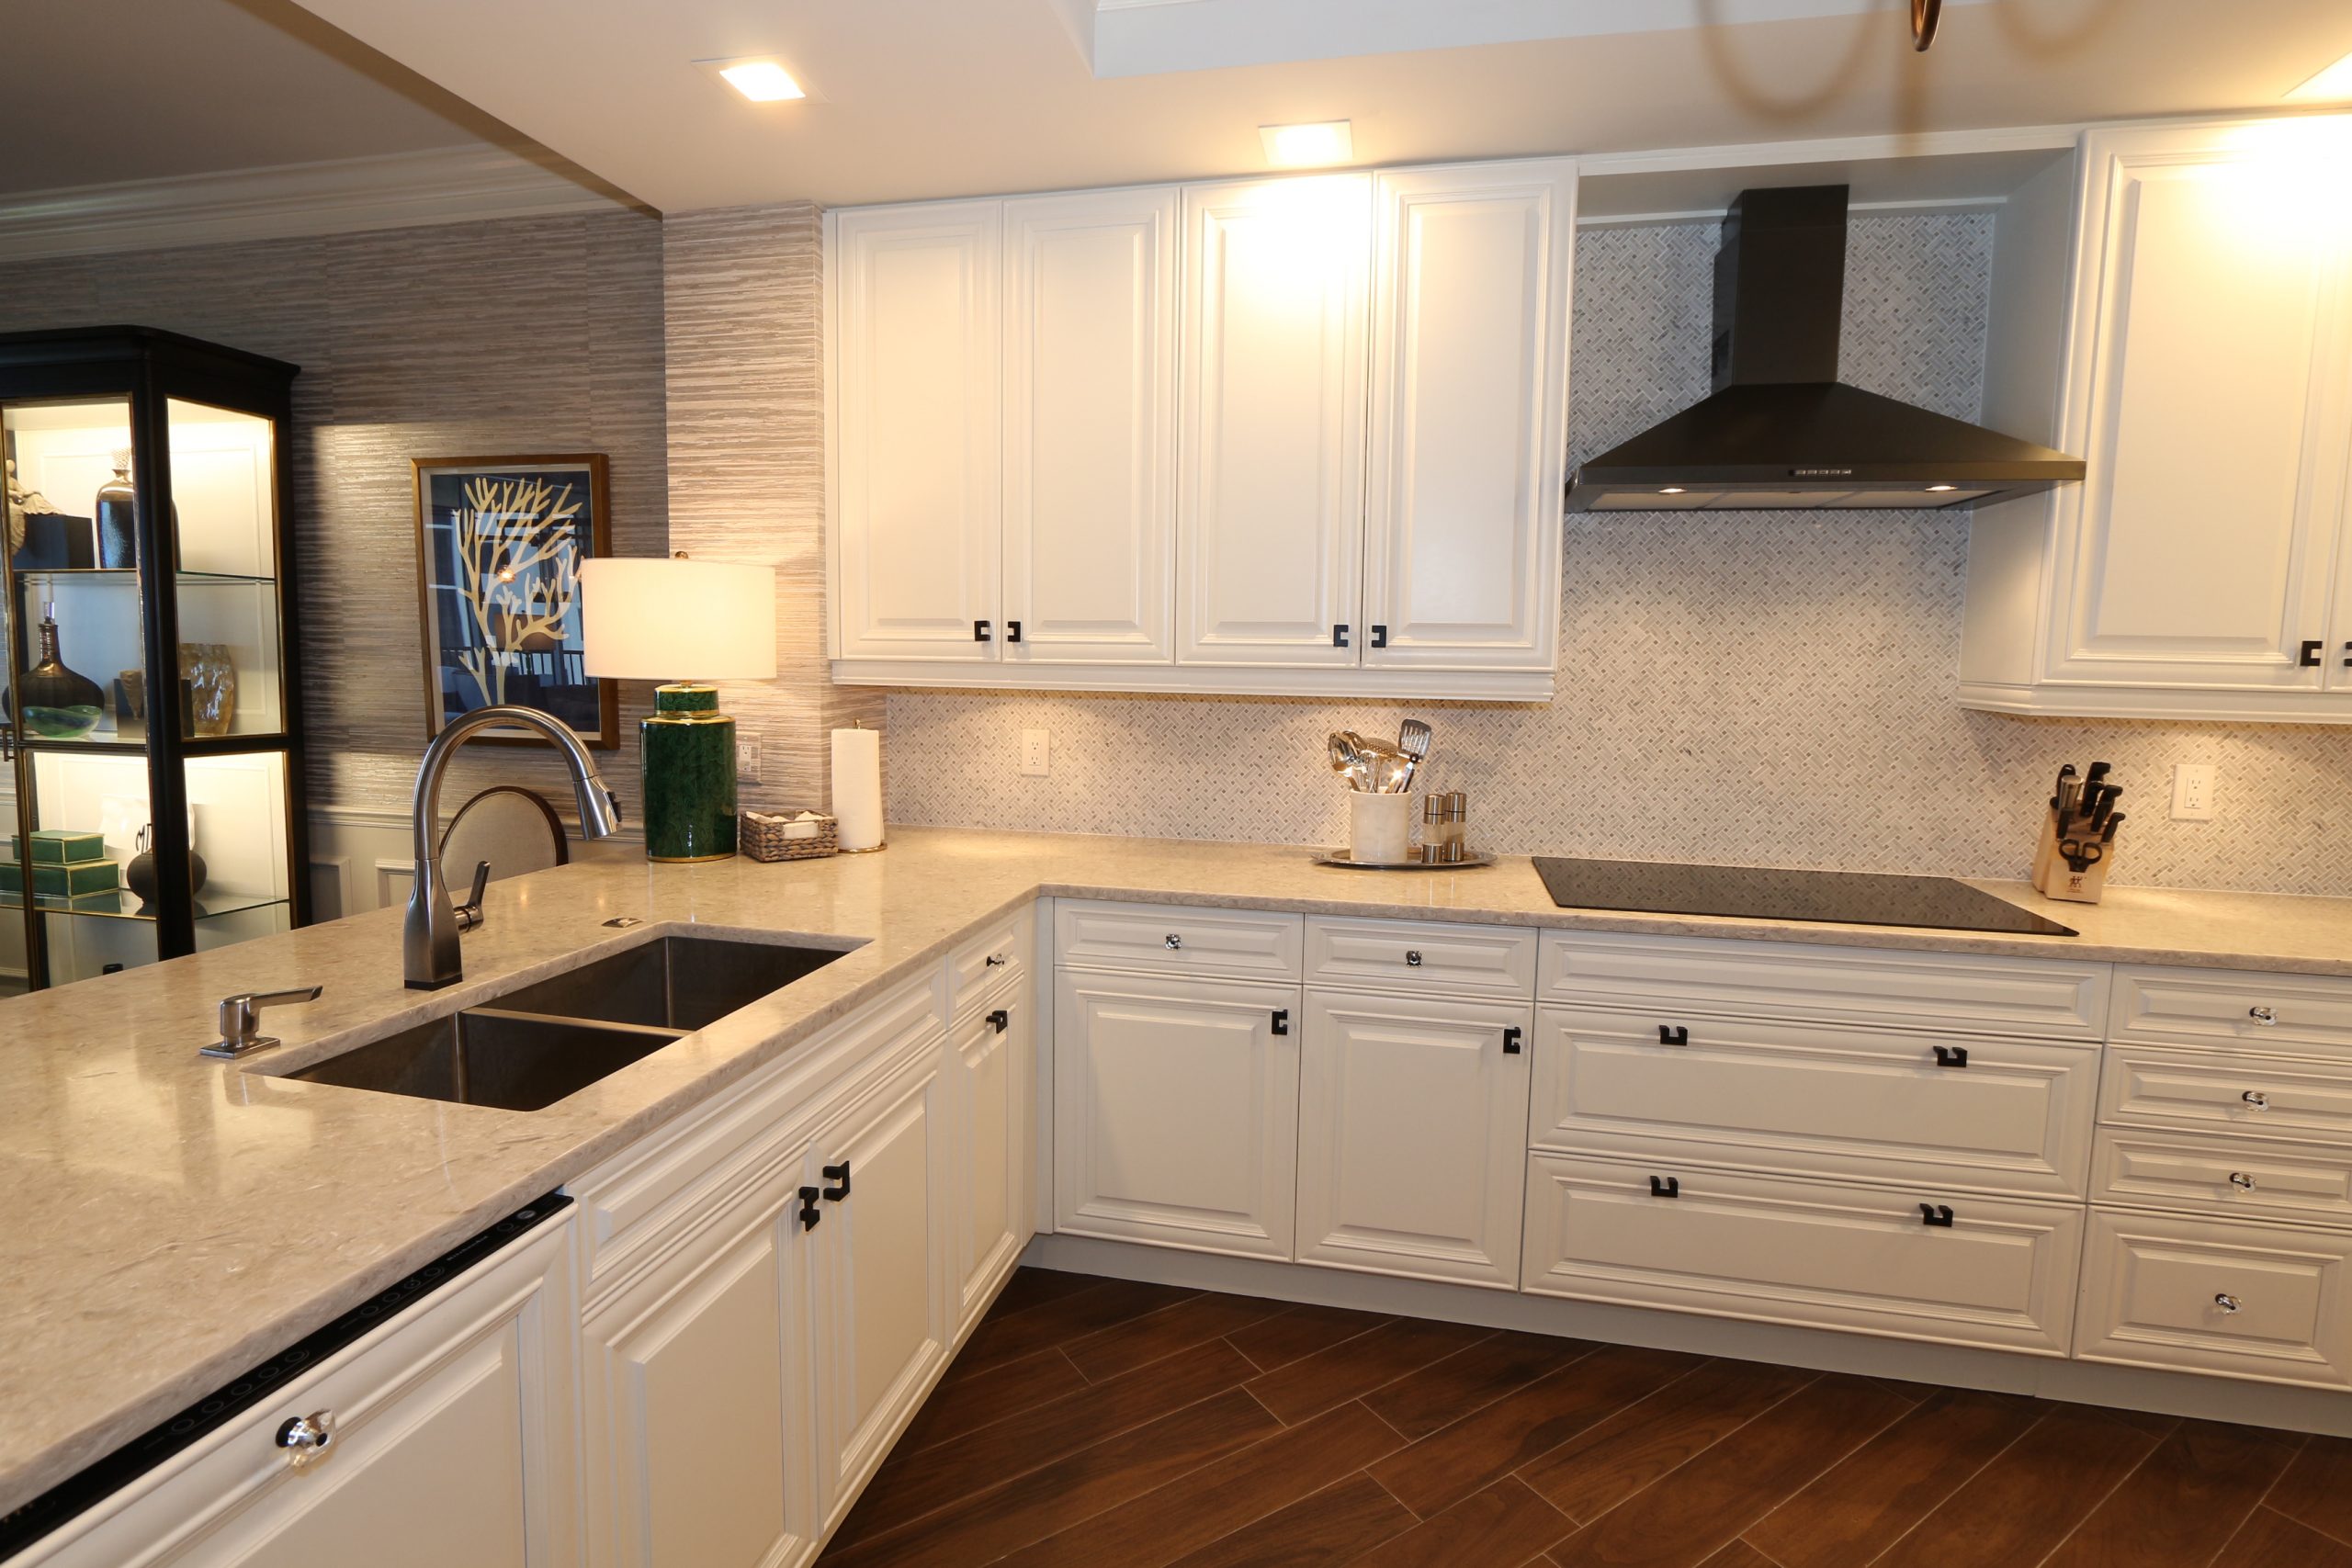 Kitchen in Florida with White Cabinets and Black Fixtures and Appliances by GailGray Home